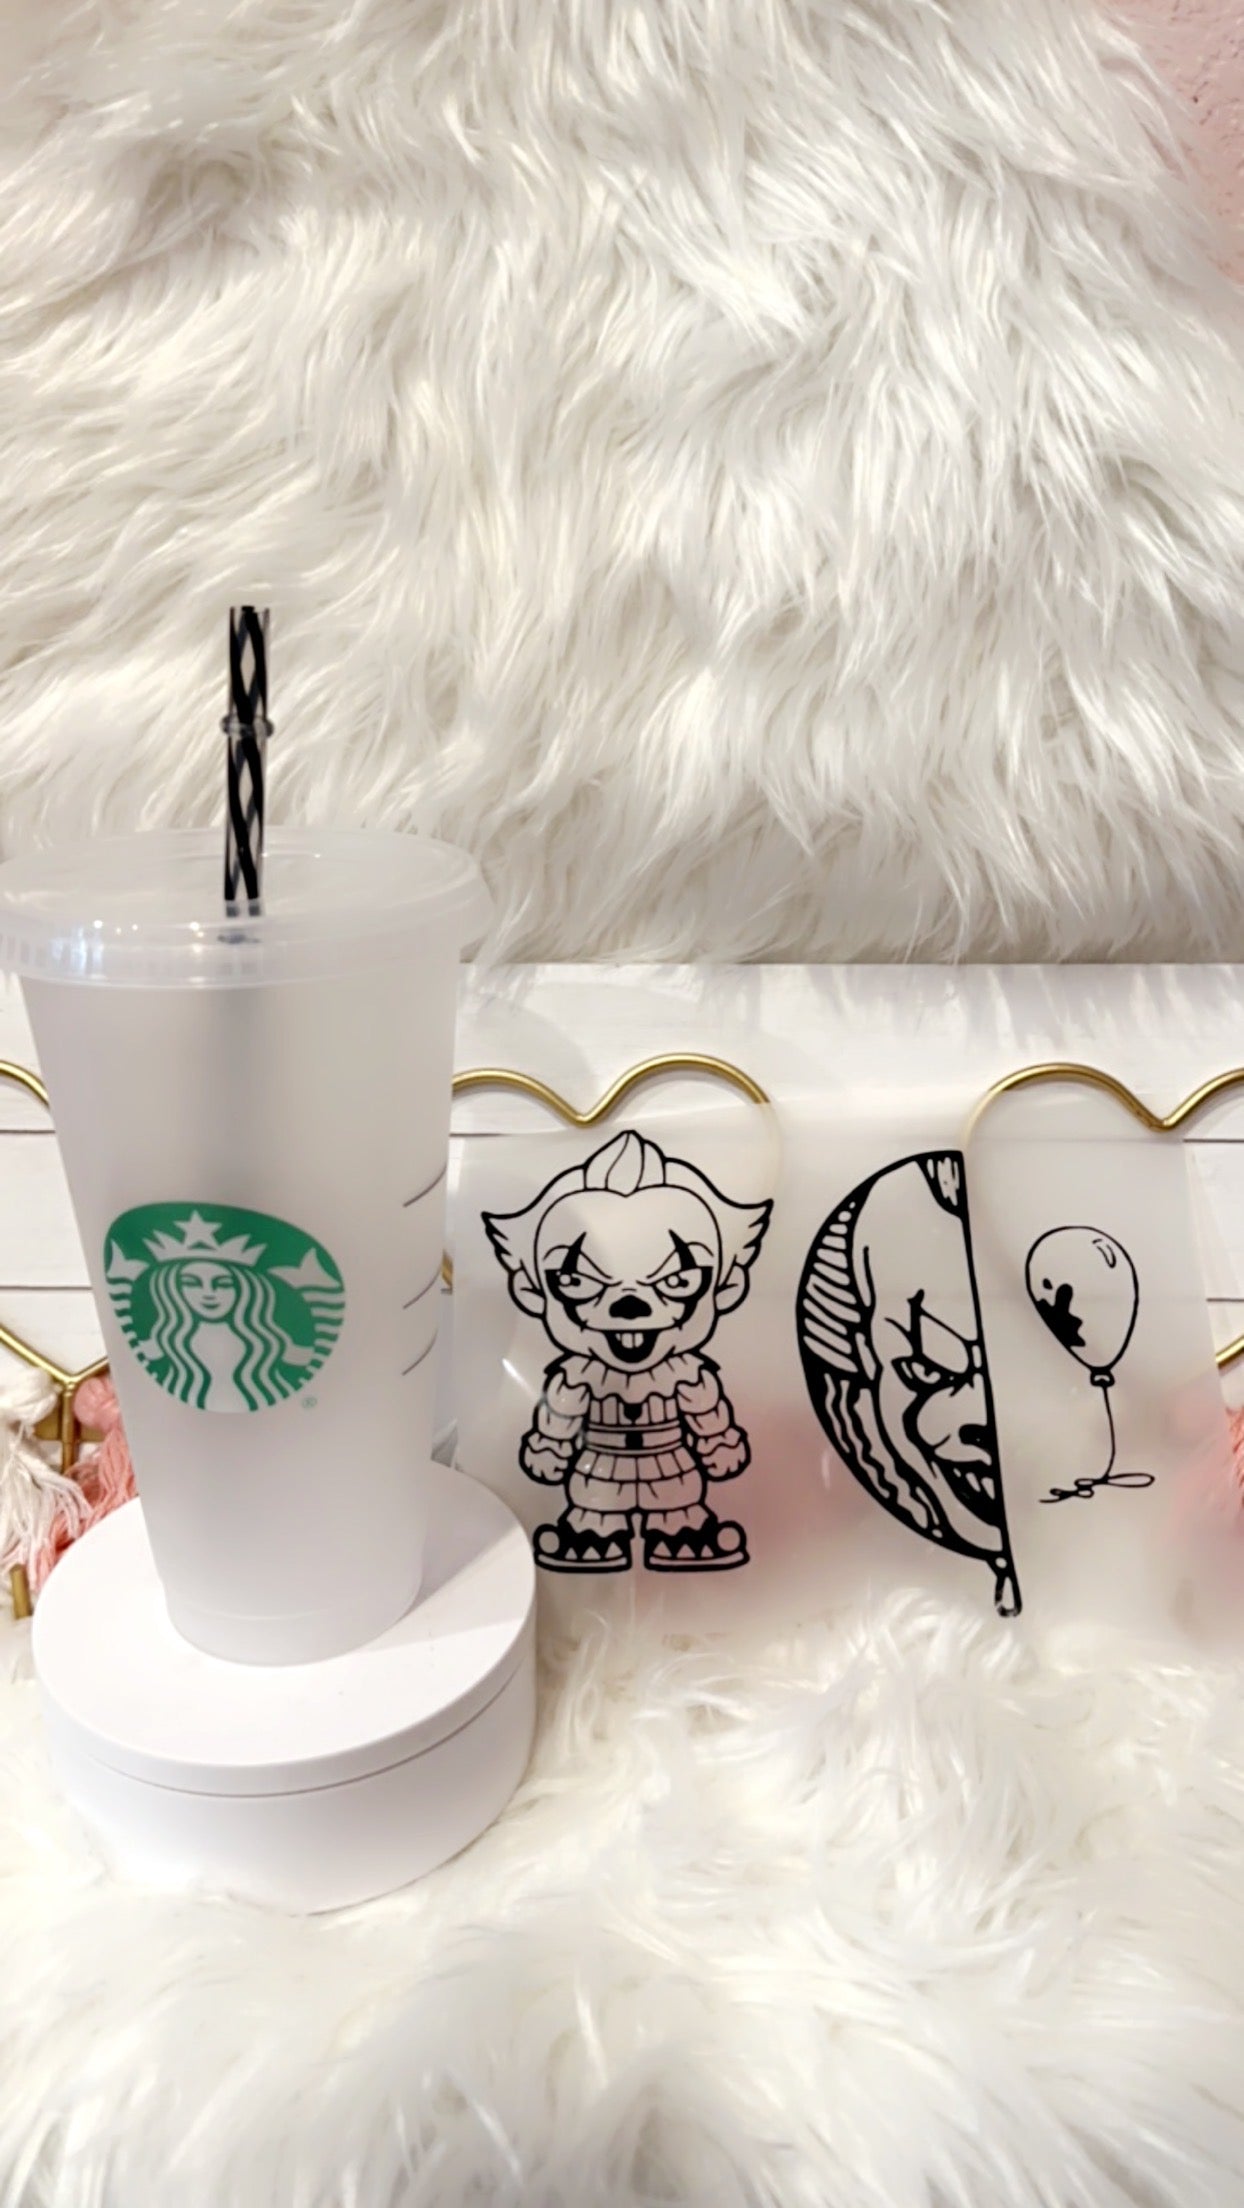 PENNYWISE STARBUCKS CUP